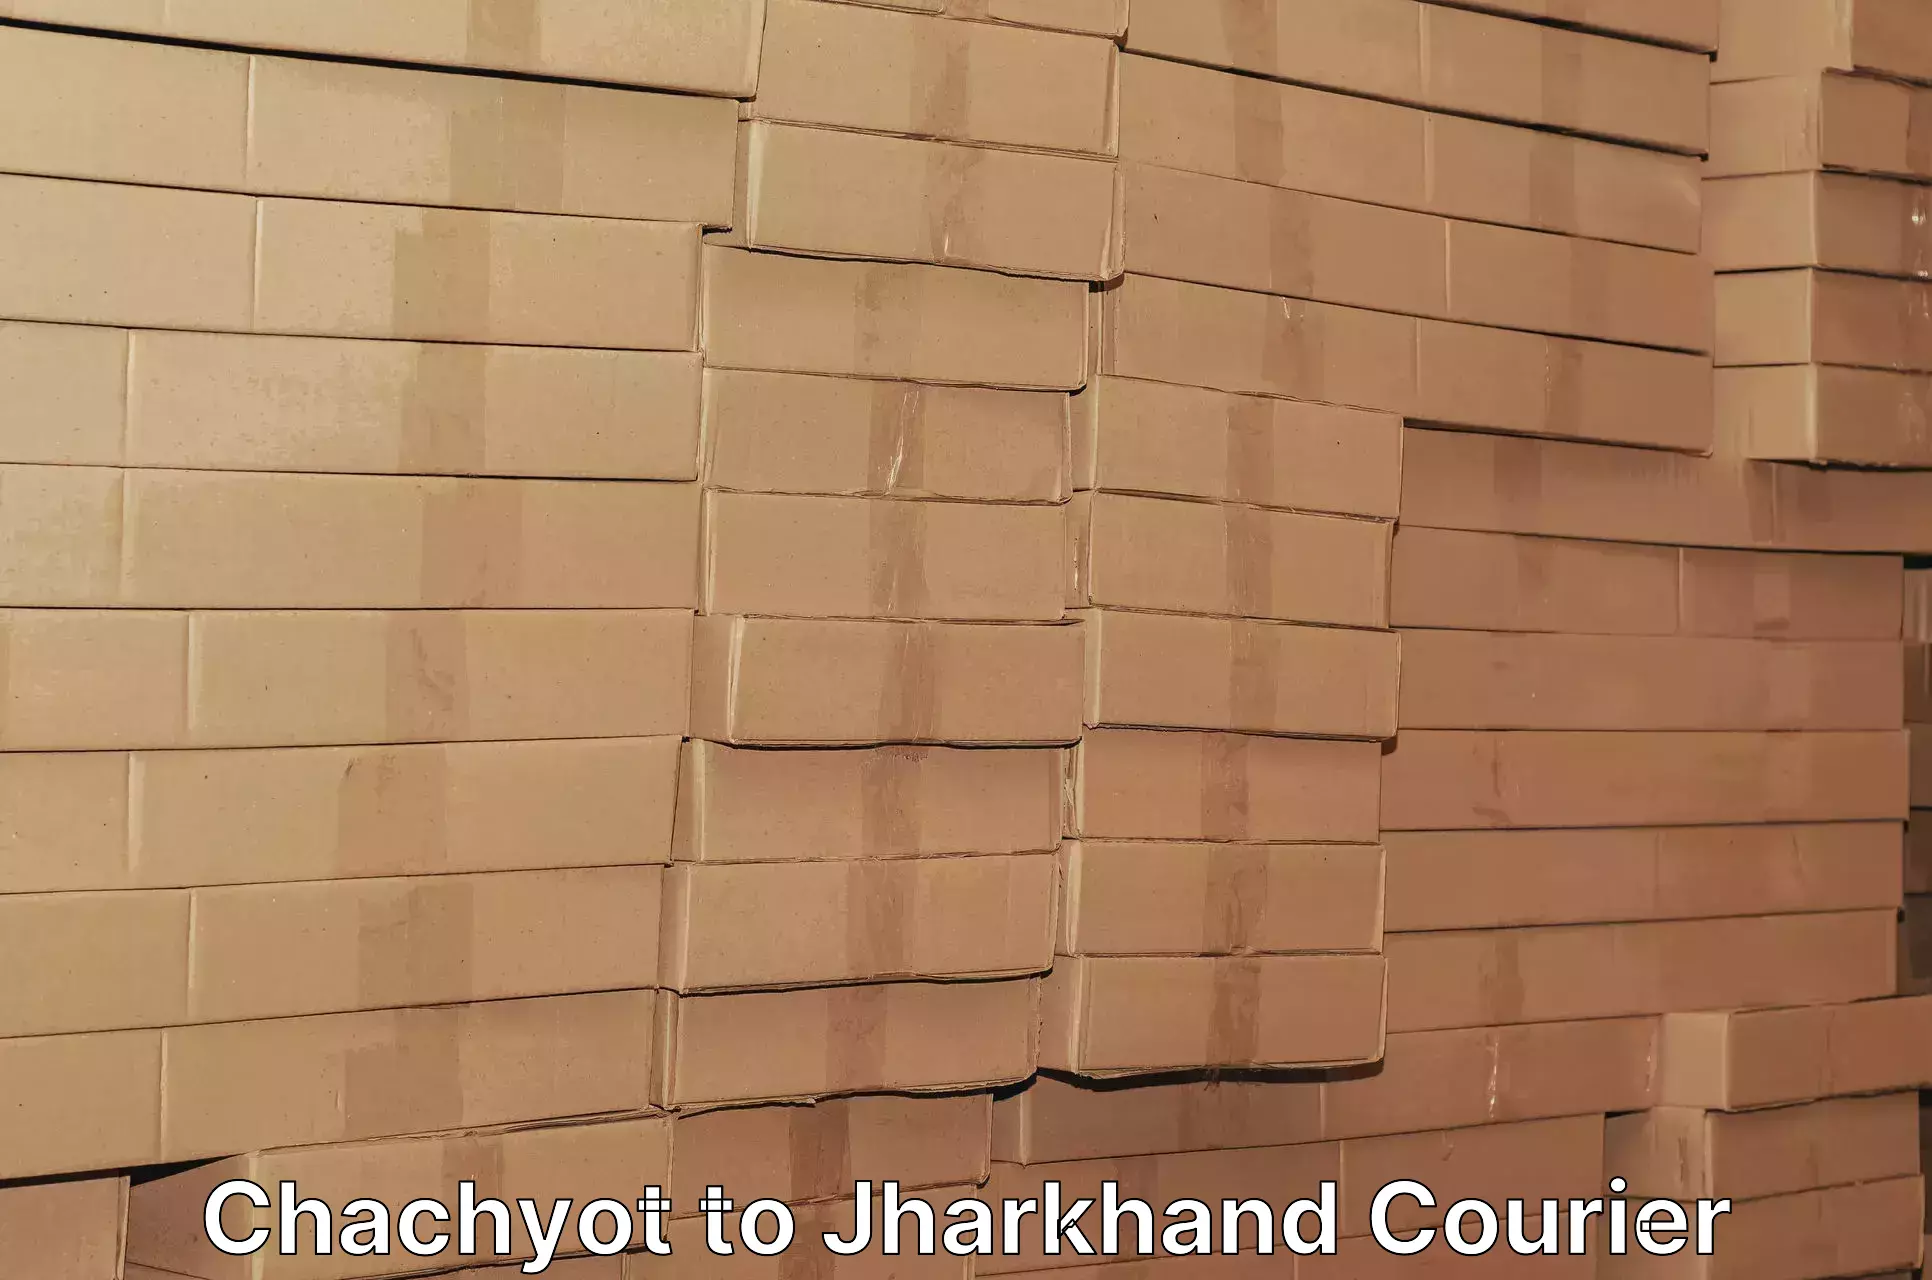 Advanced courier platforms Chachyot to Jharkhand